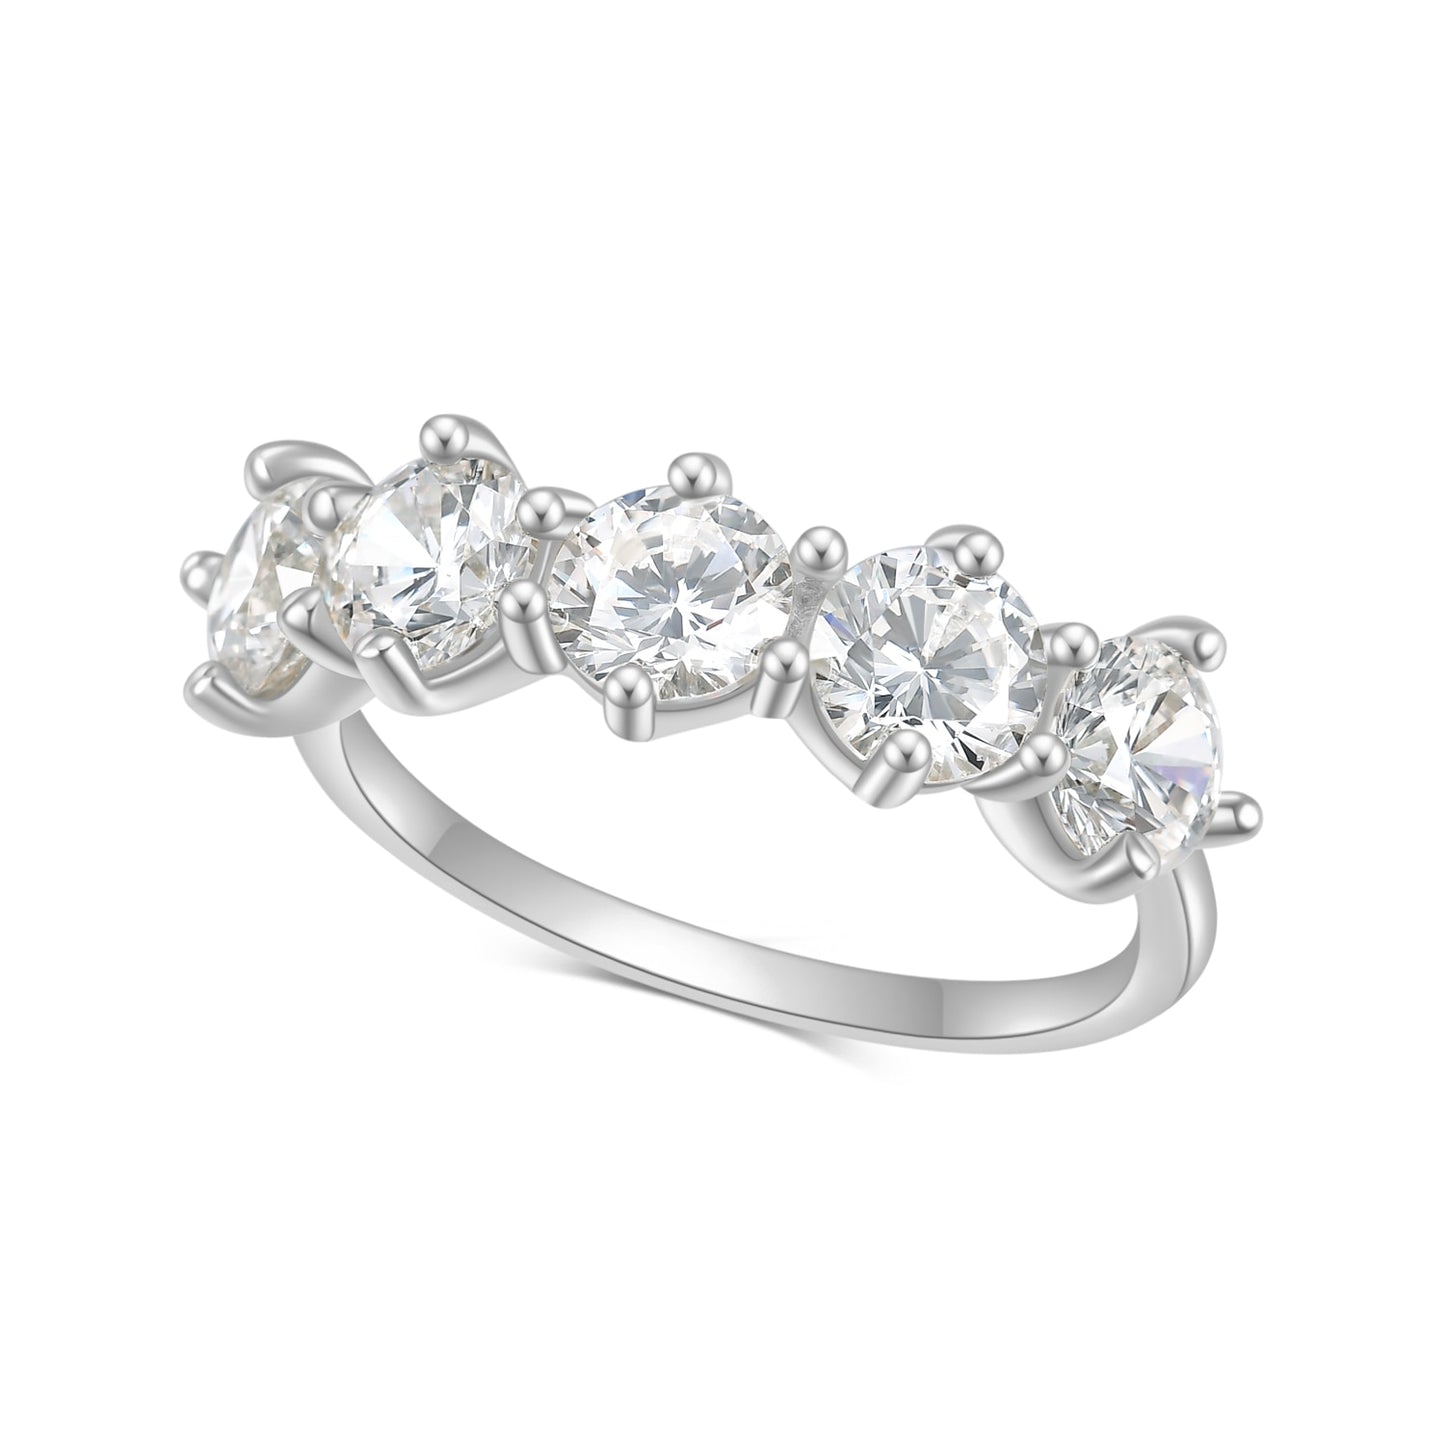 A silver ring with 5 half carat round moissanites set horizontally on the band.